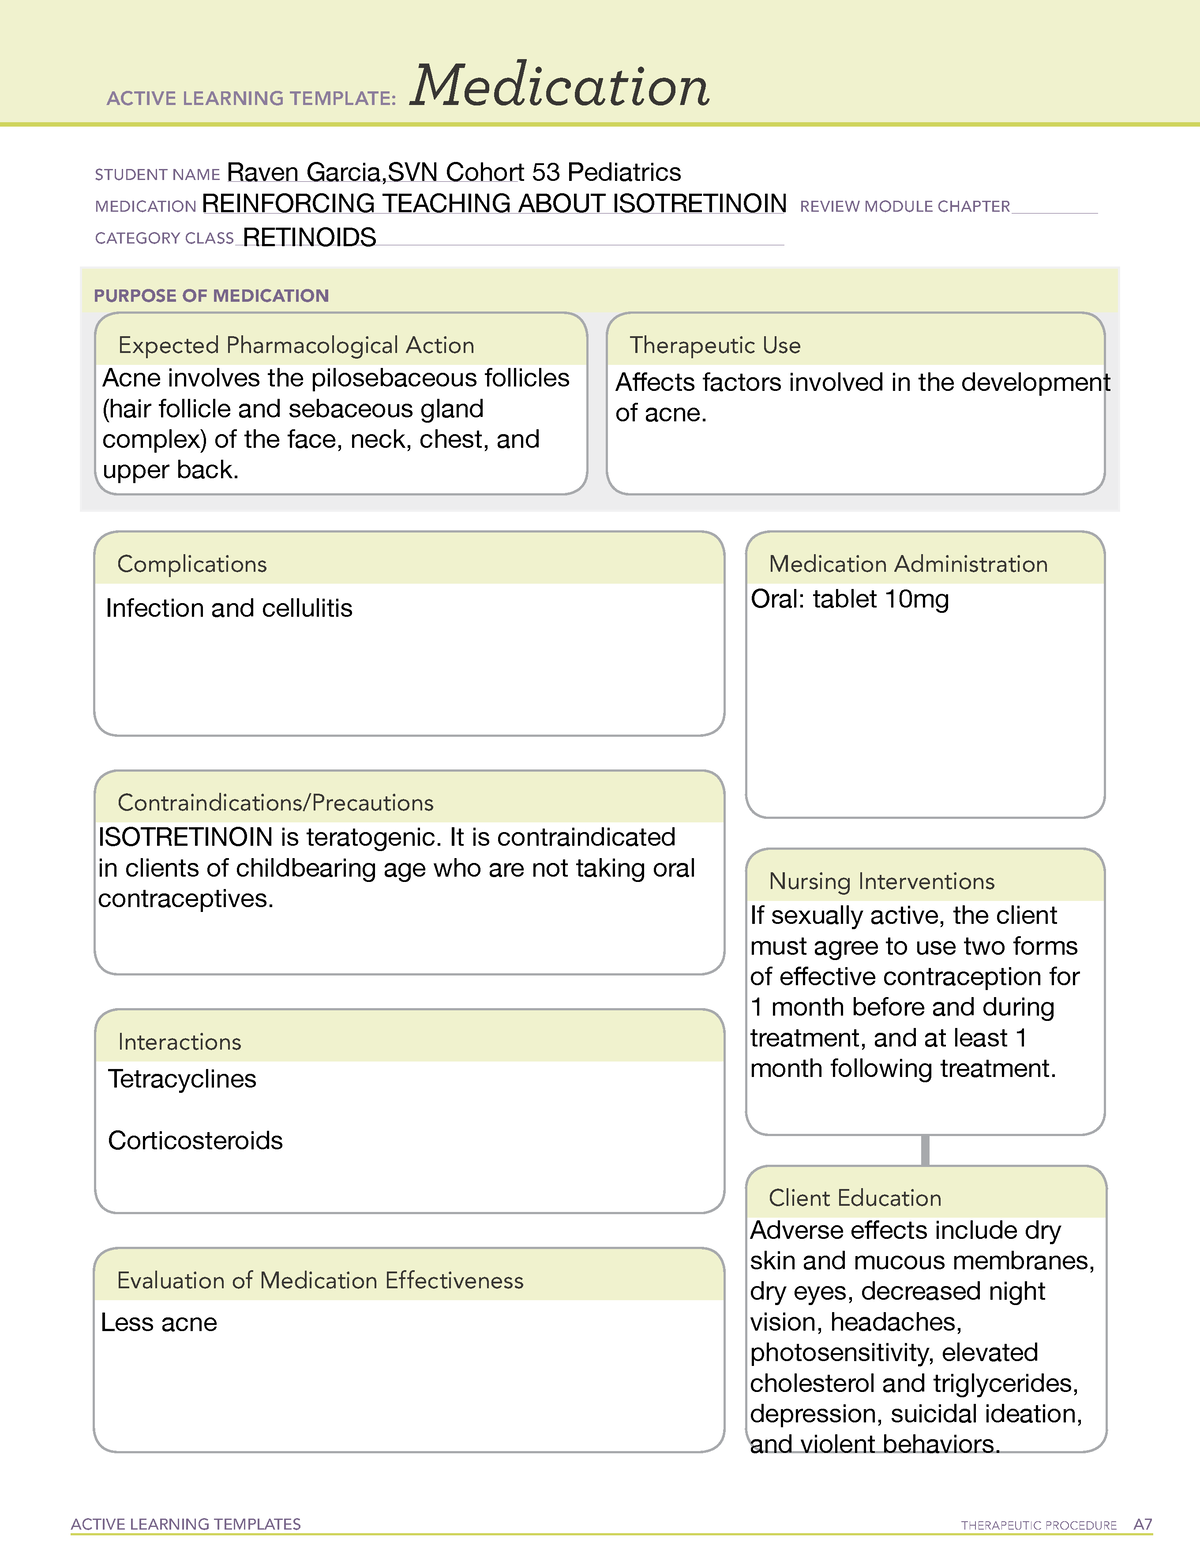 focus-review-14-notes-active-learning-templates-therapeutic